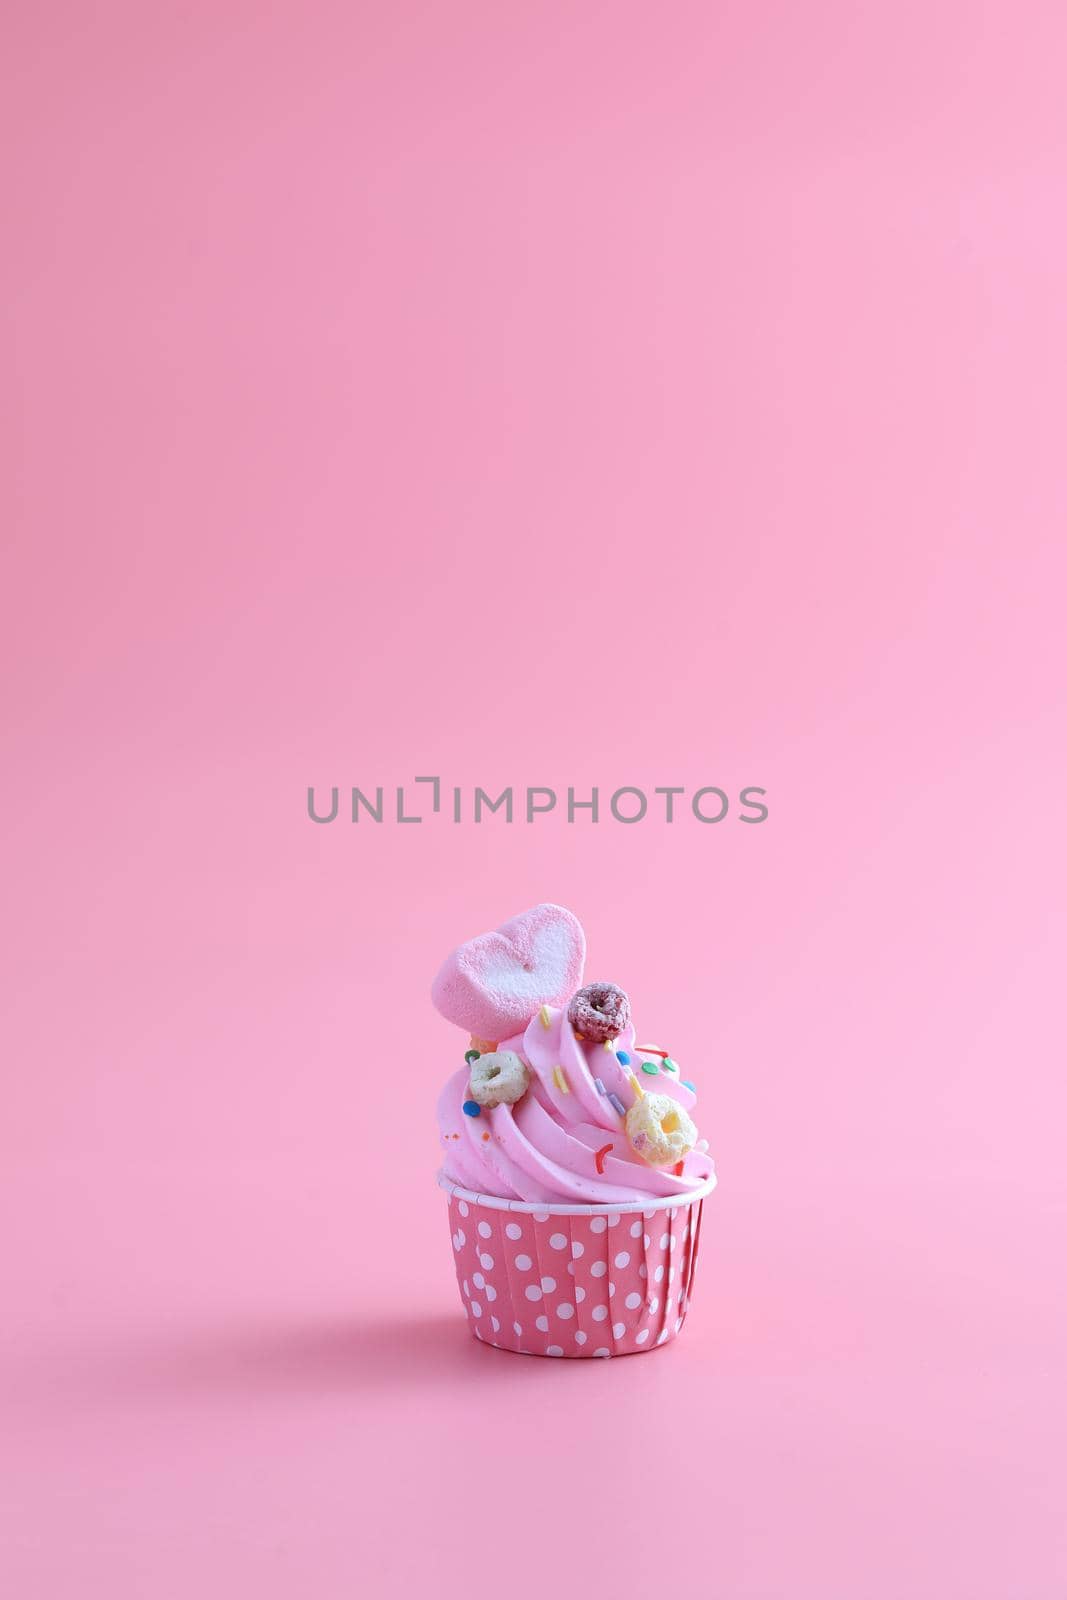 cupcake isolated in pink background